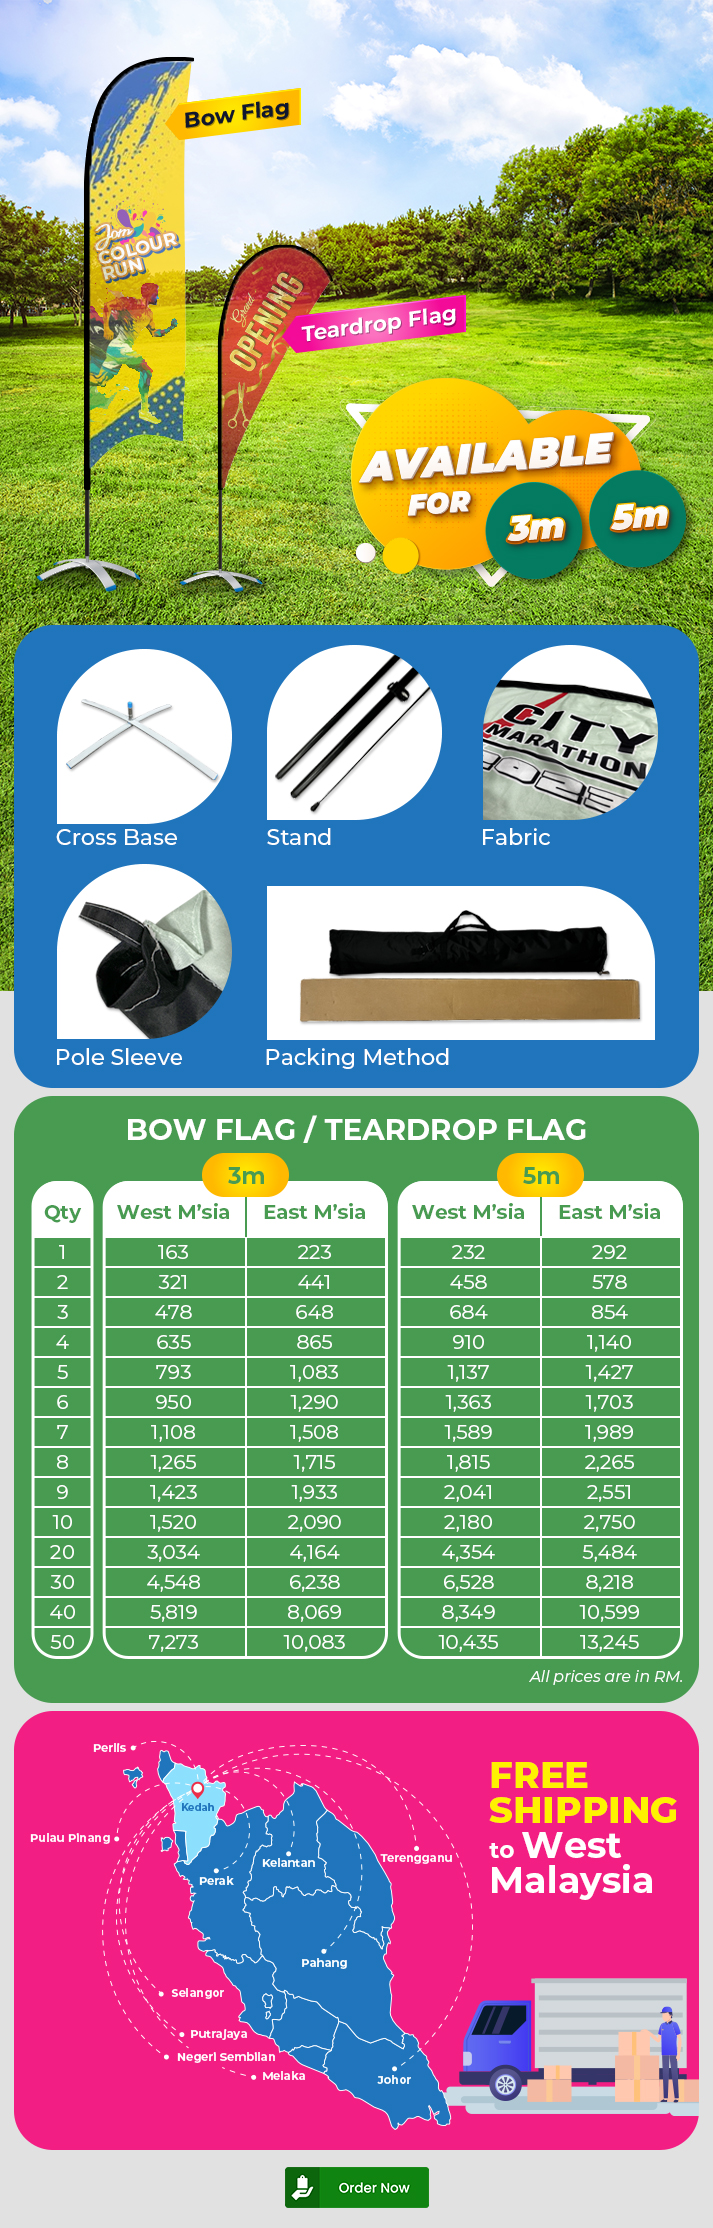 Be the First to Experience Wind Flag – Available Now!